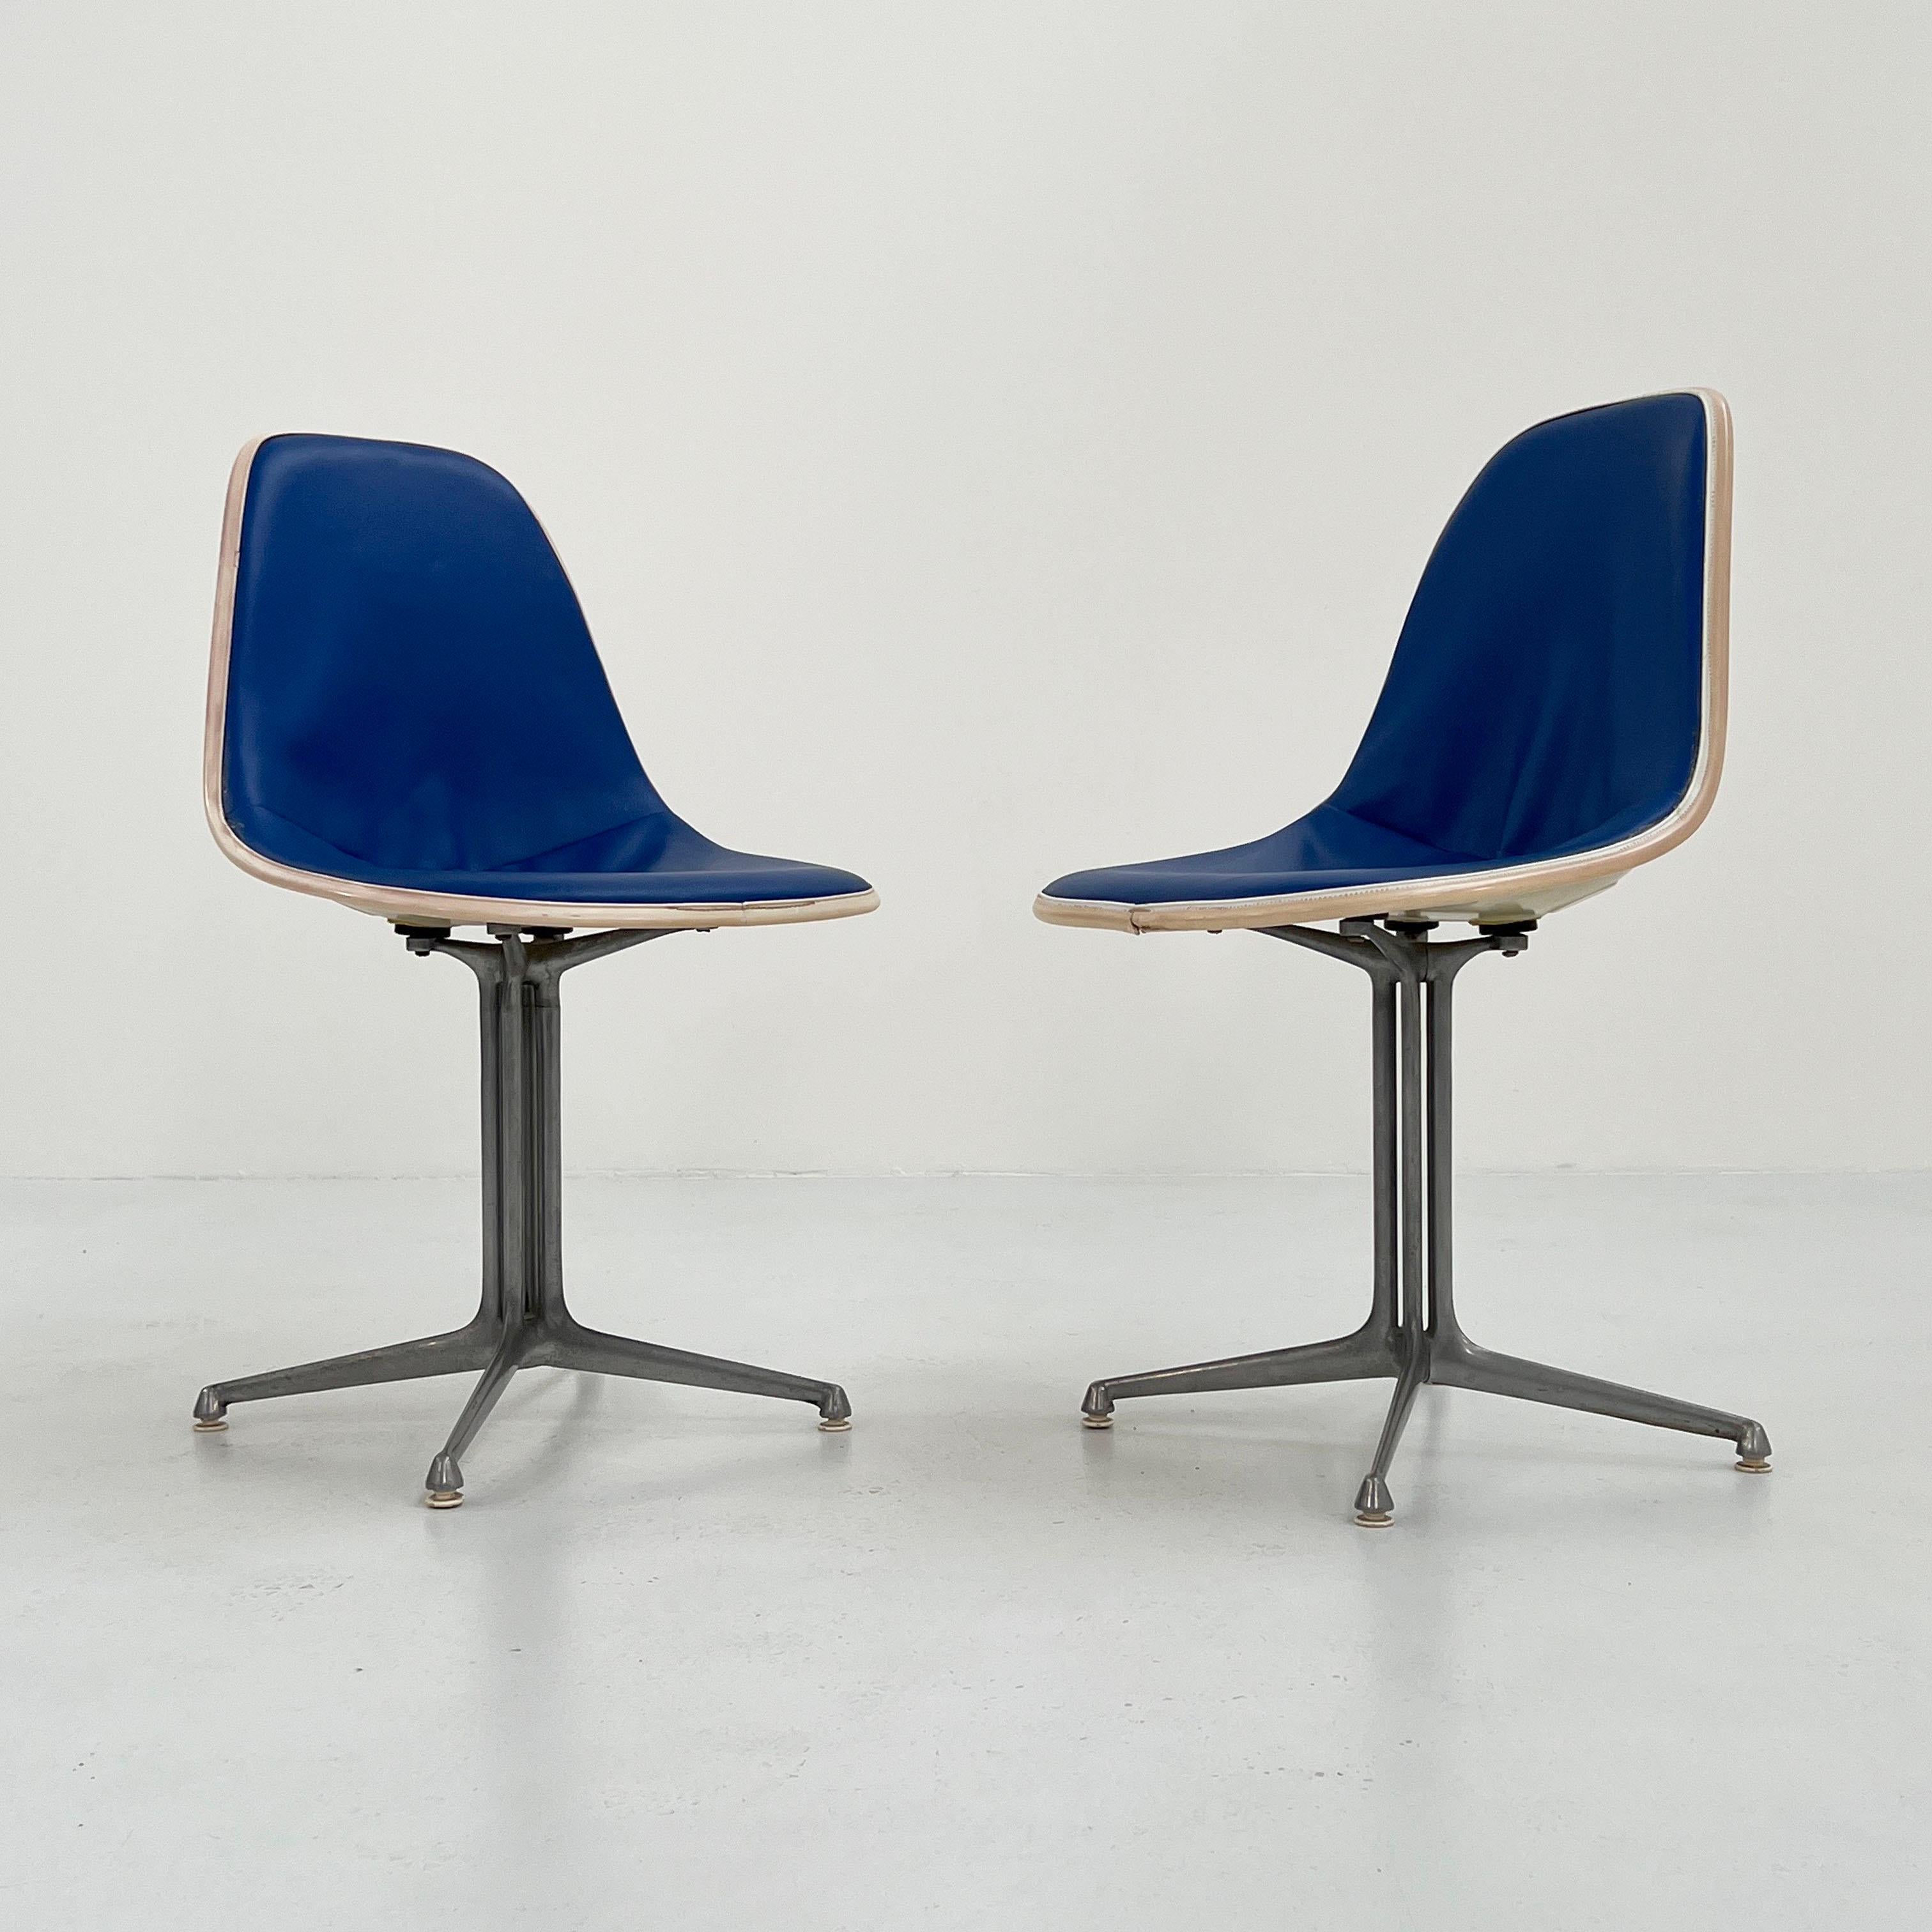 American Set of 4 La Fonda Dining Chairs by Charles & Ray Eames for Herman Miller, 1960s